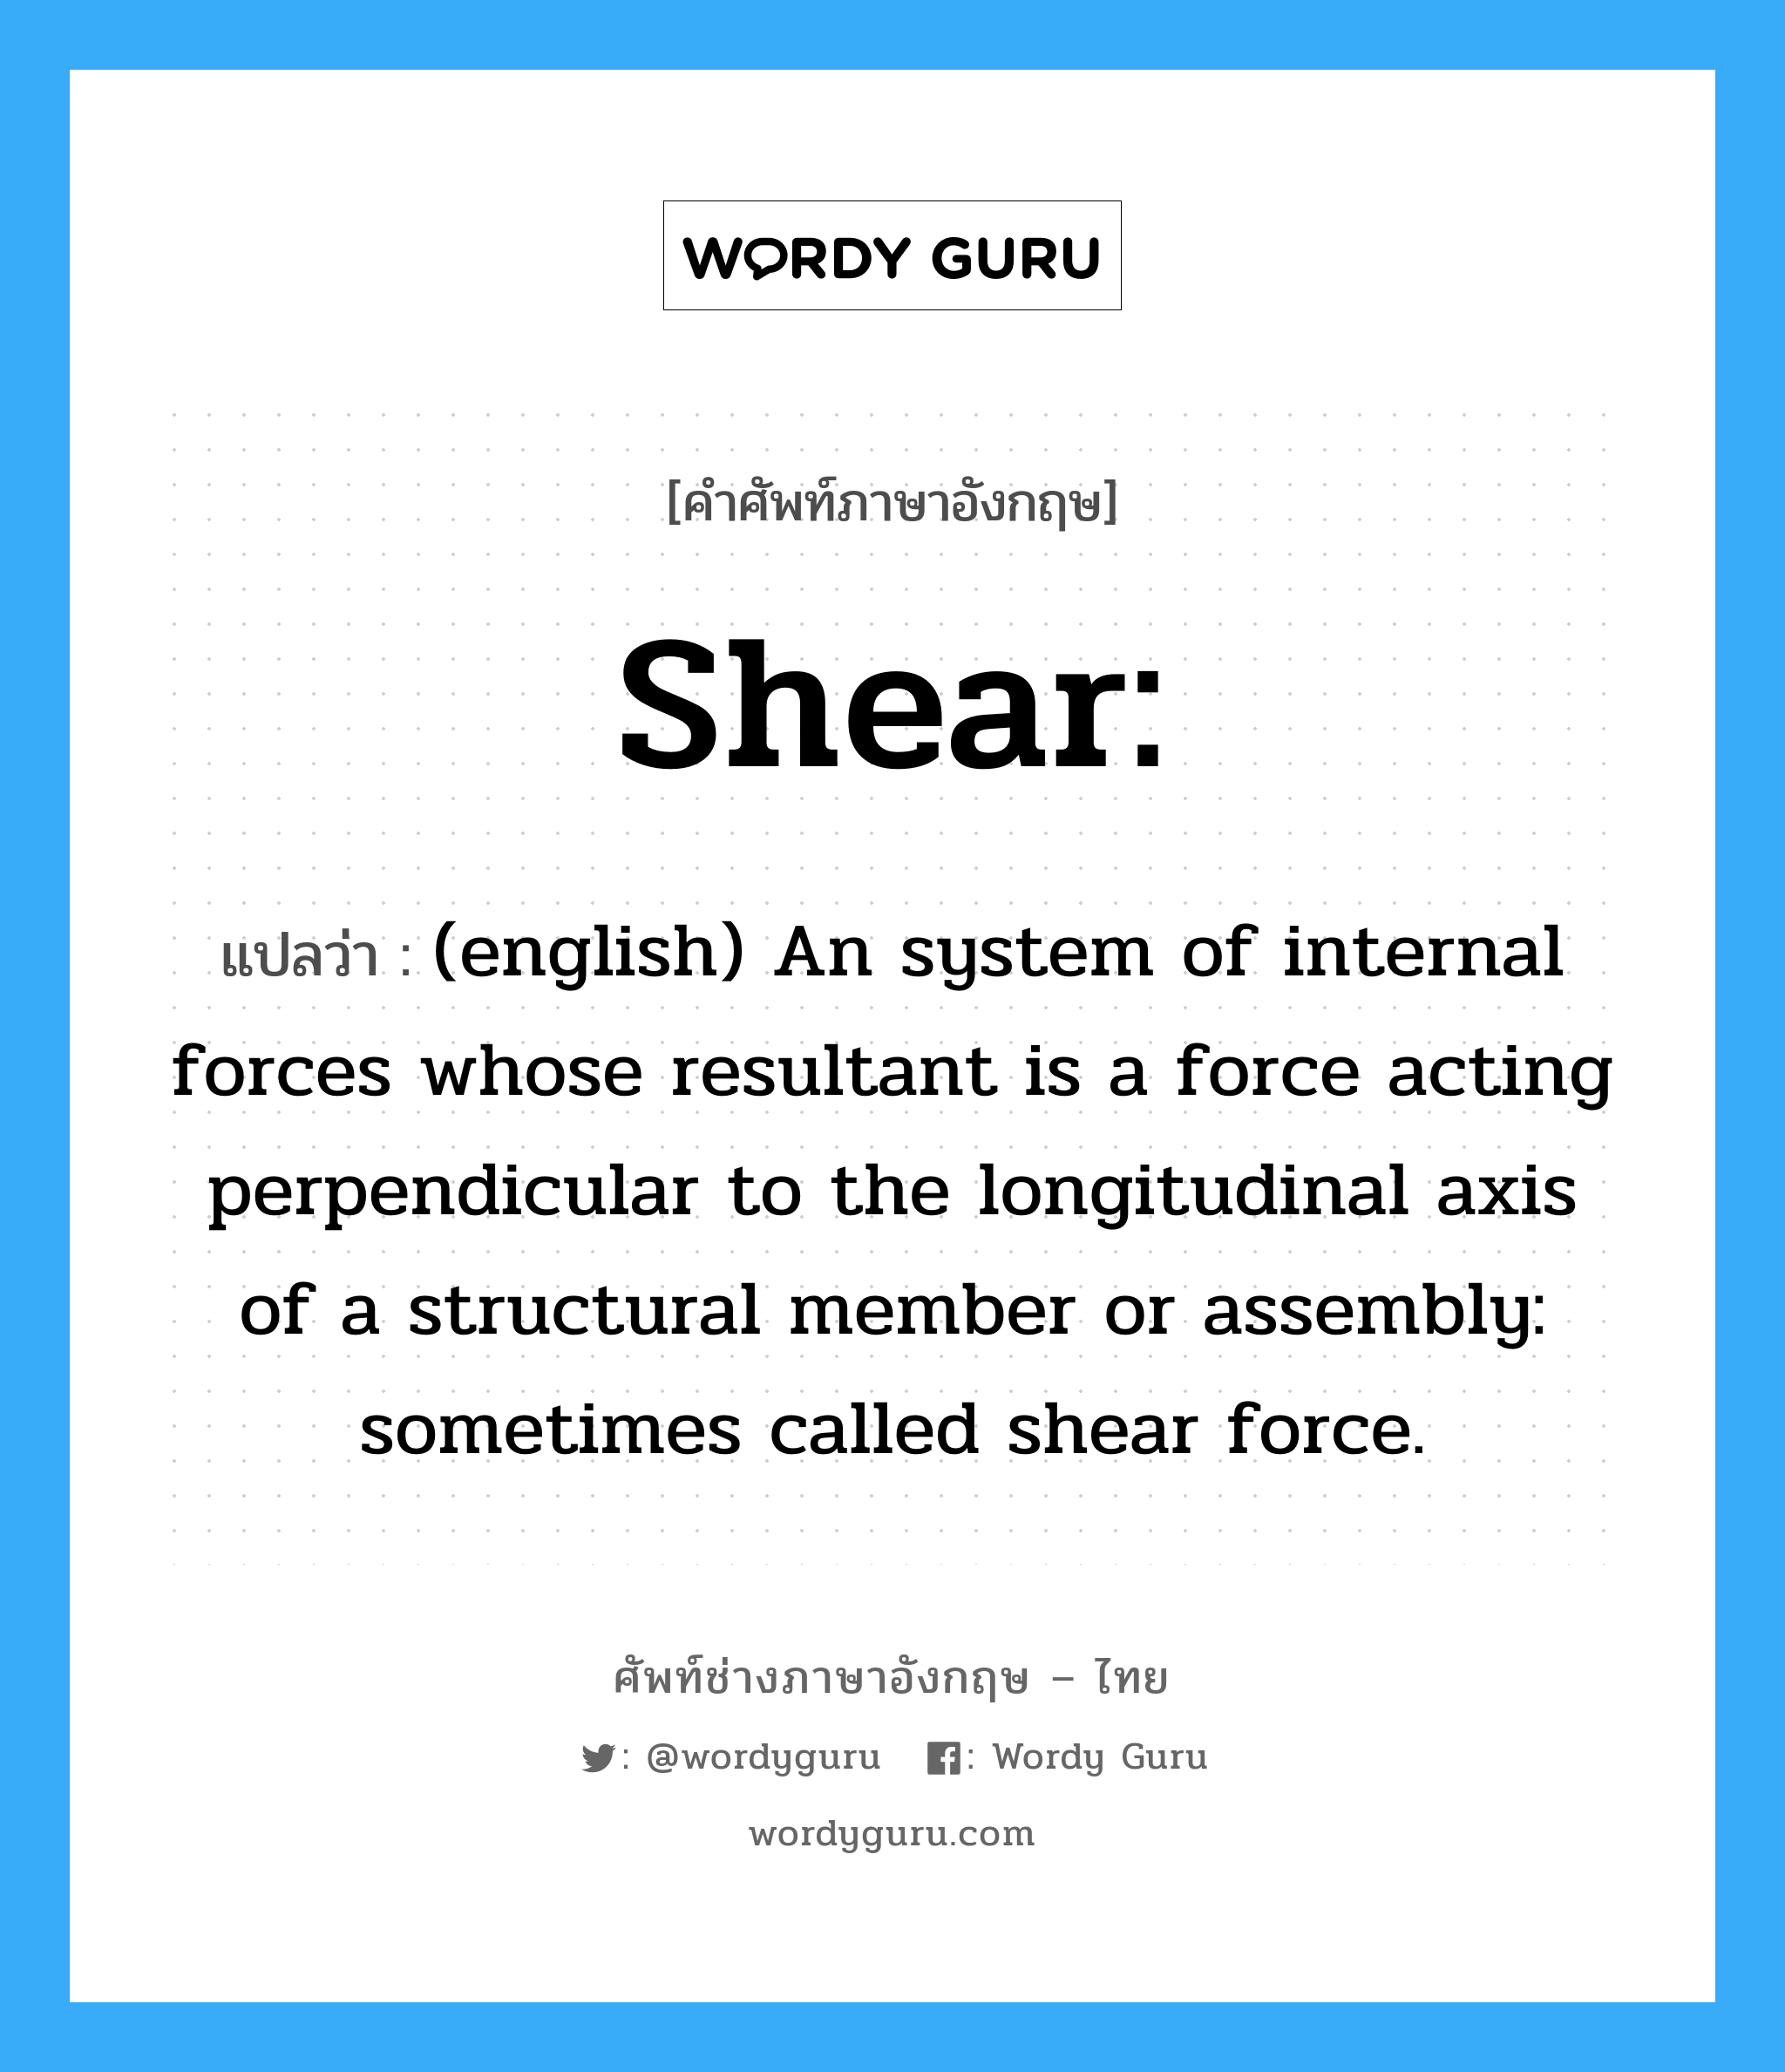 Shear: แปลว่า?, คำศัพท์ช่างภาษาอังกฤษ - ไทย Shear: คำศัพท์ภาษาอังกฤษ Shear: แปลว่า (english) An system of internal forces whose resultant is a force acting perpendicular to the longitudinal axis of a structural member or assembly: sometimes called shear force.